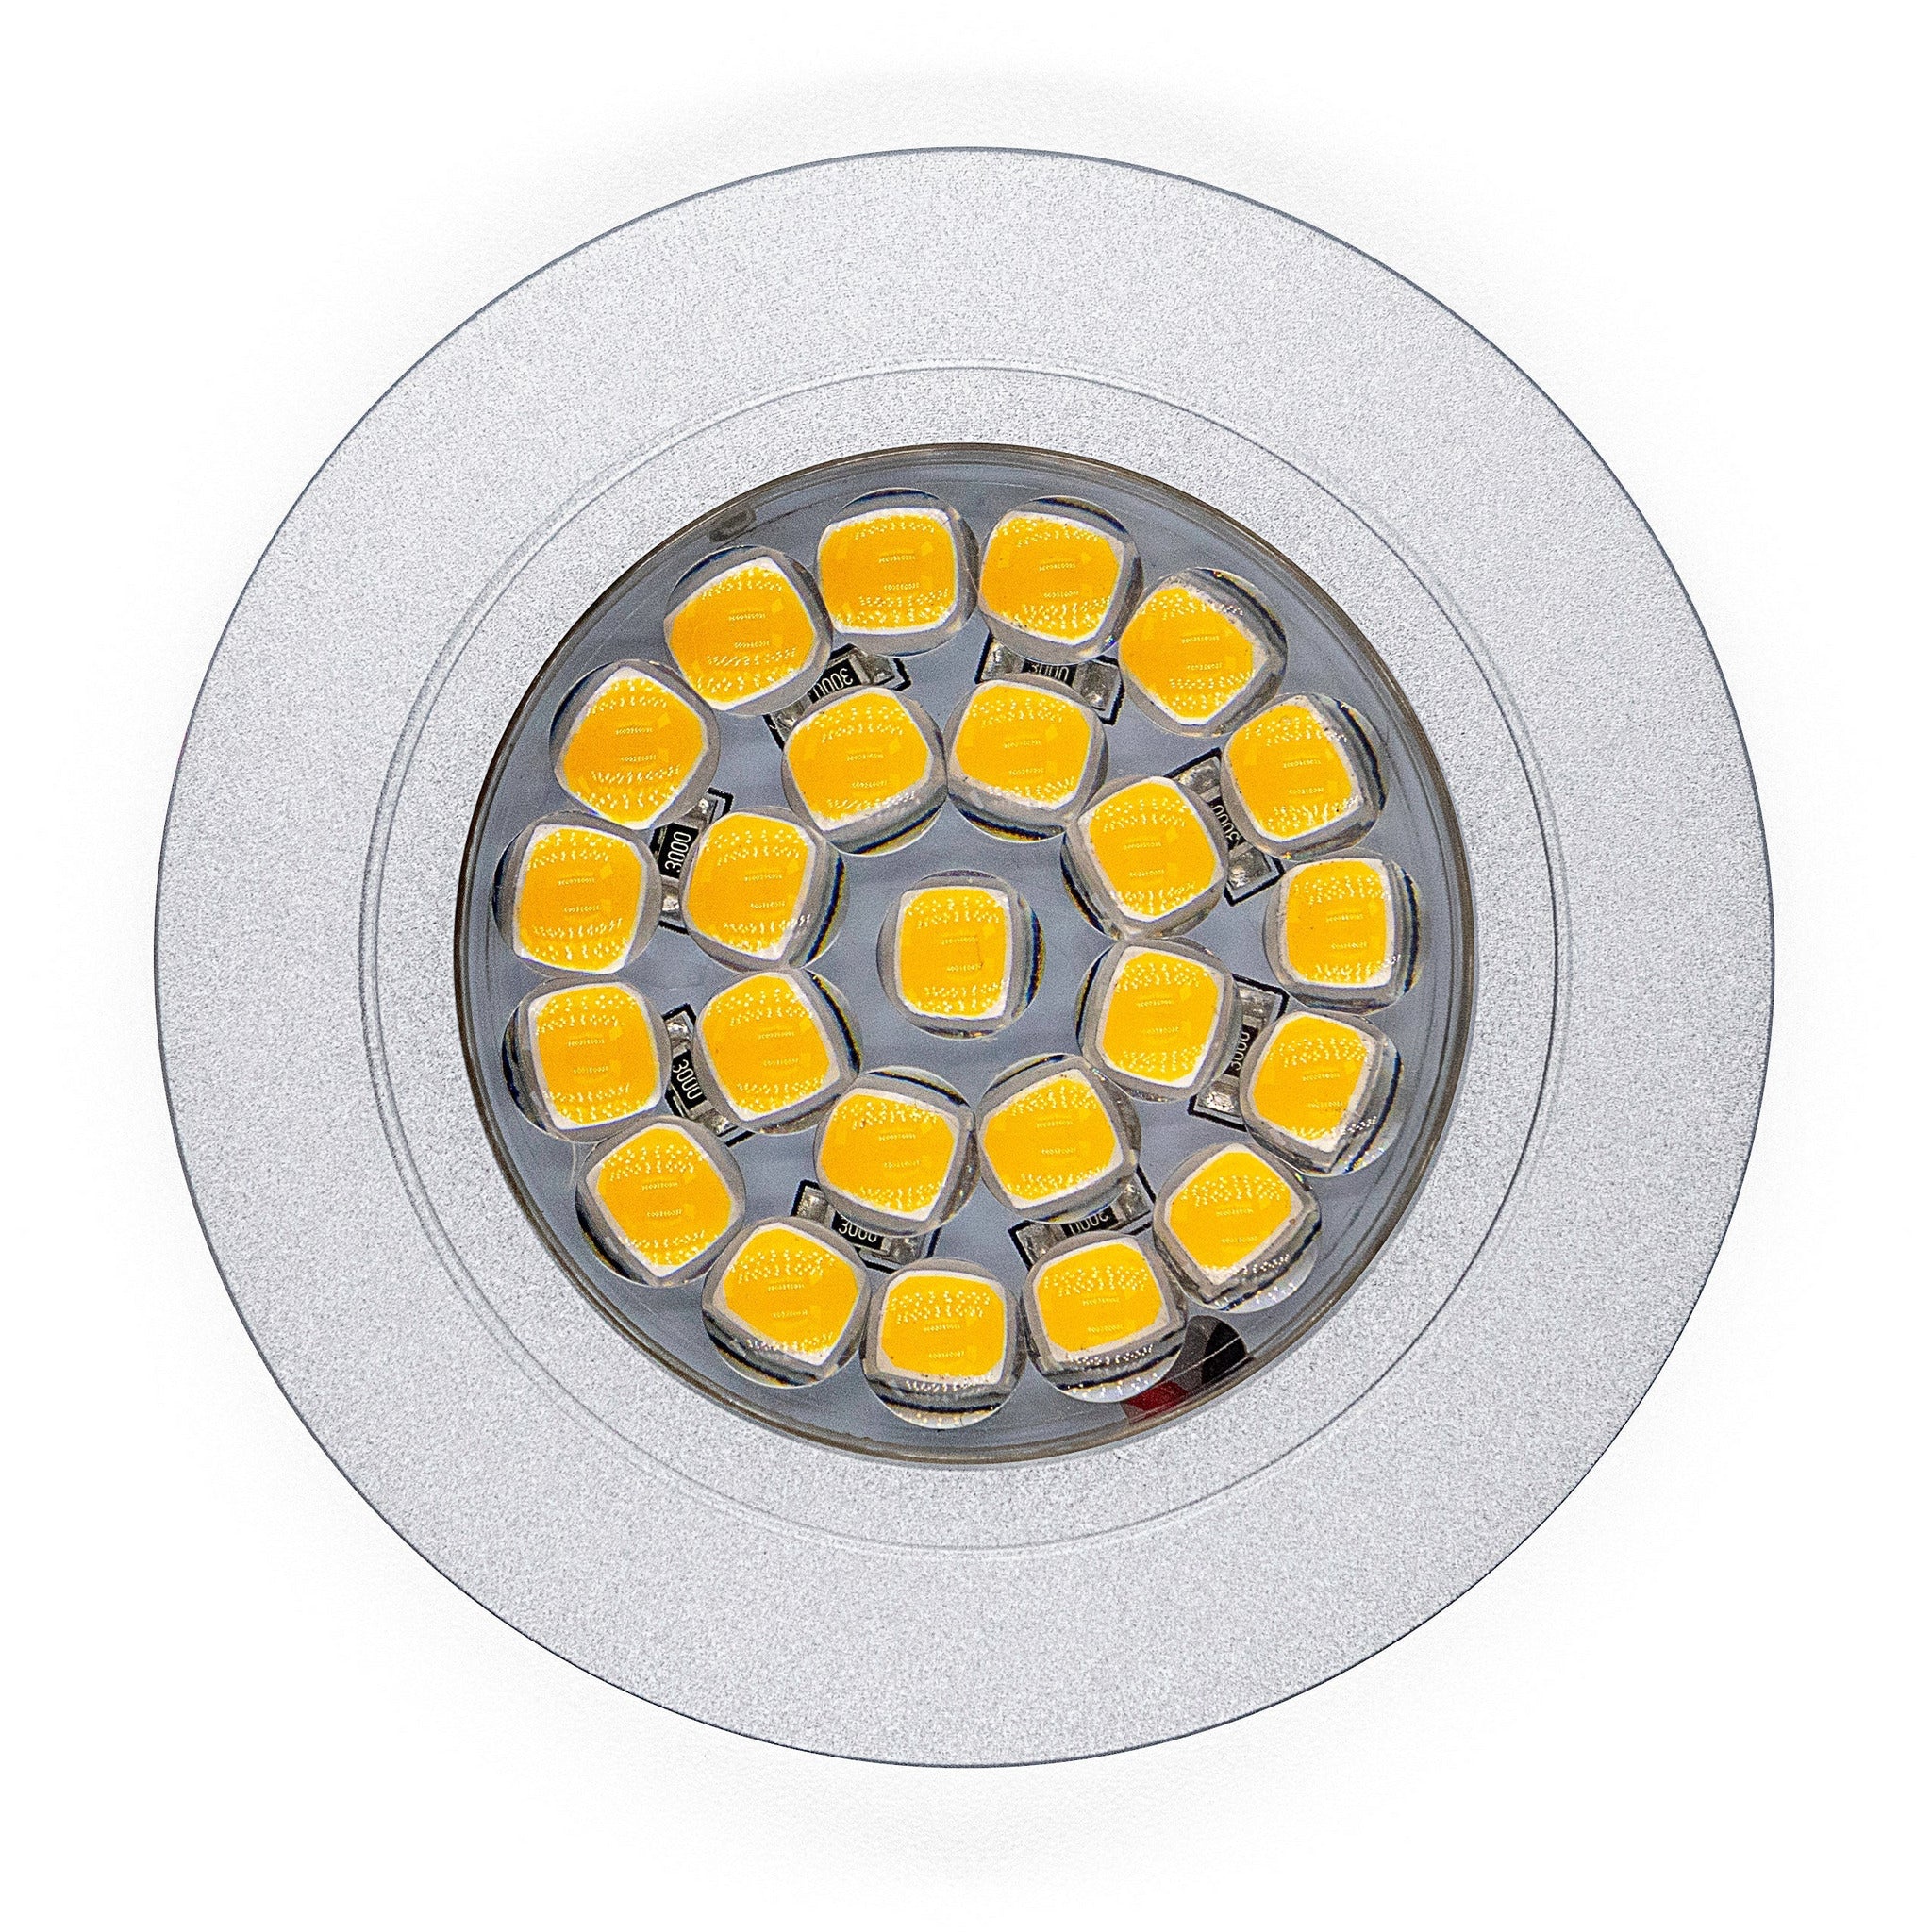 Silver 2W 24 LED Recessed Light - Dimmable, Touch On/Off (Warm White) Kiravans 